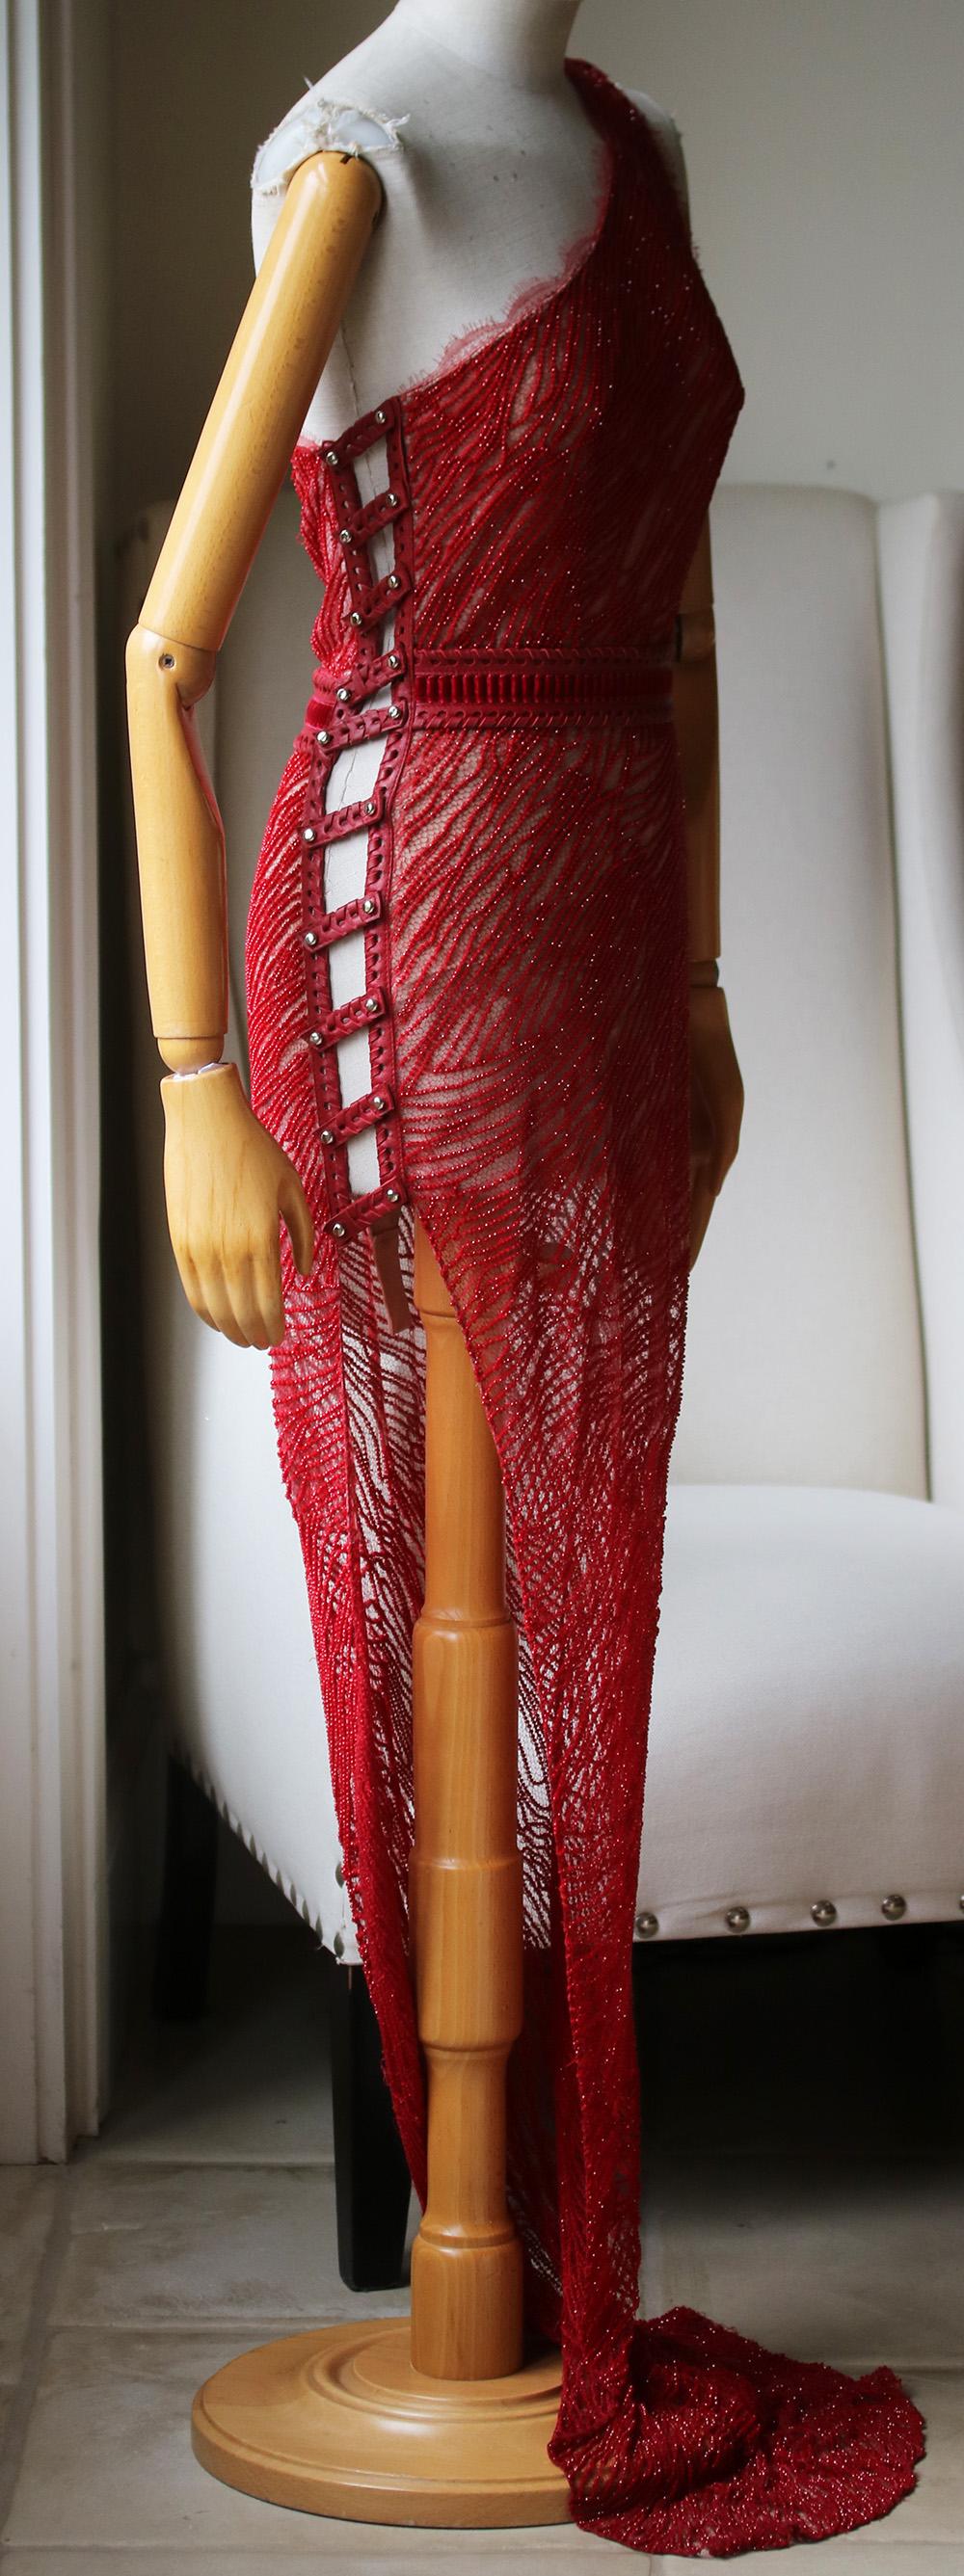 Custom made Aadnevik red crystal beaded lace dress. Built in bodysuit. Cut-out and slit detail down the side with removable leather fastening. Extra leather fastenings varying different sizes attached. The size can be altered. Leather and velvet